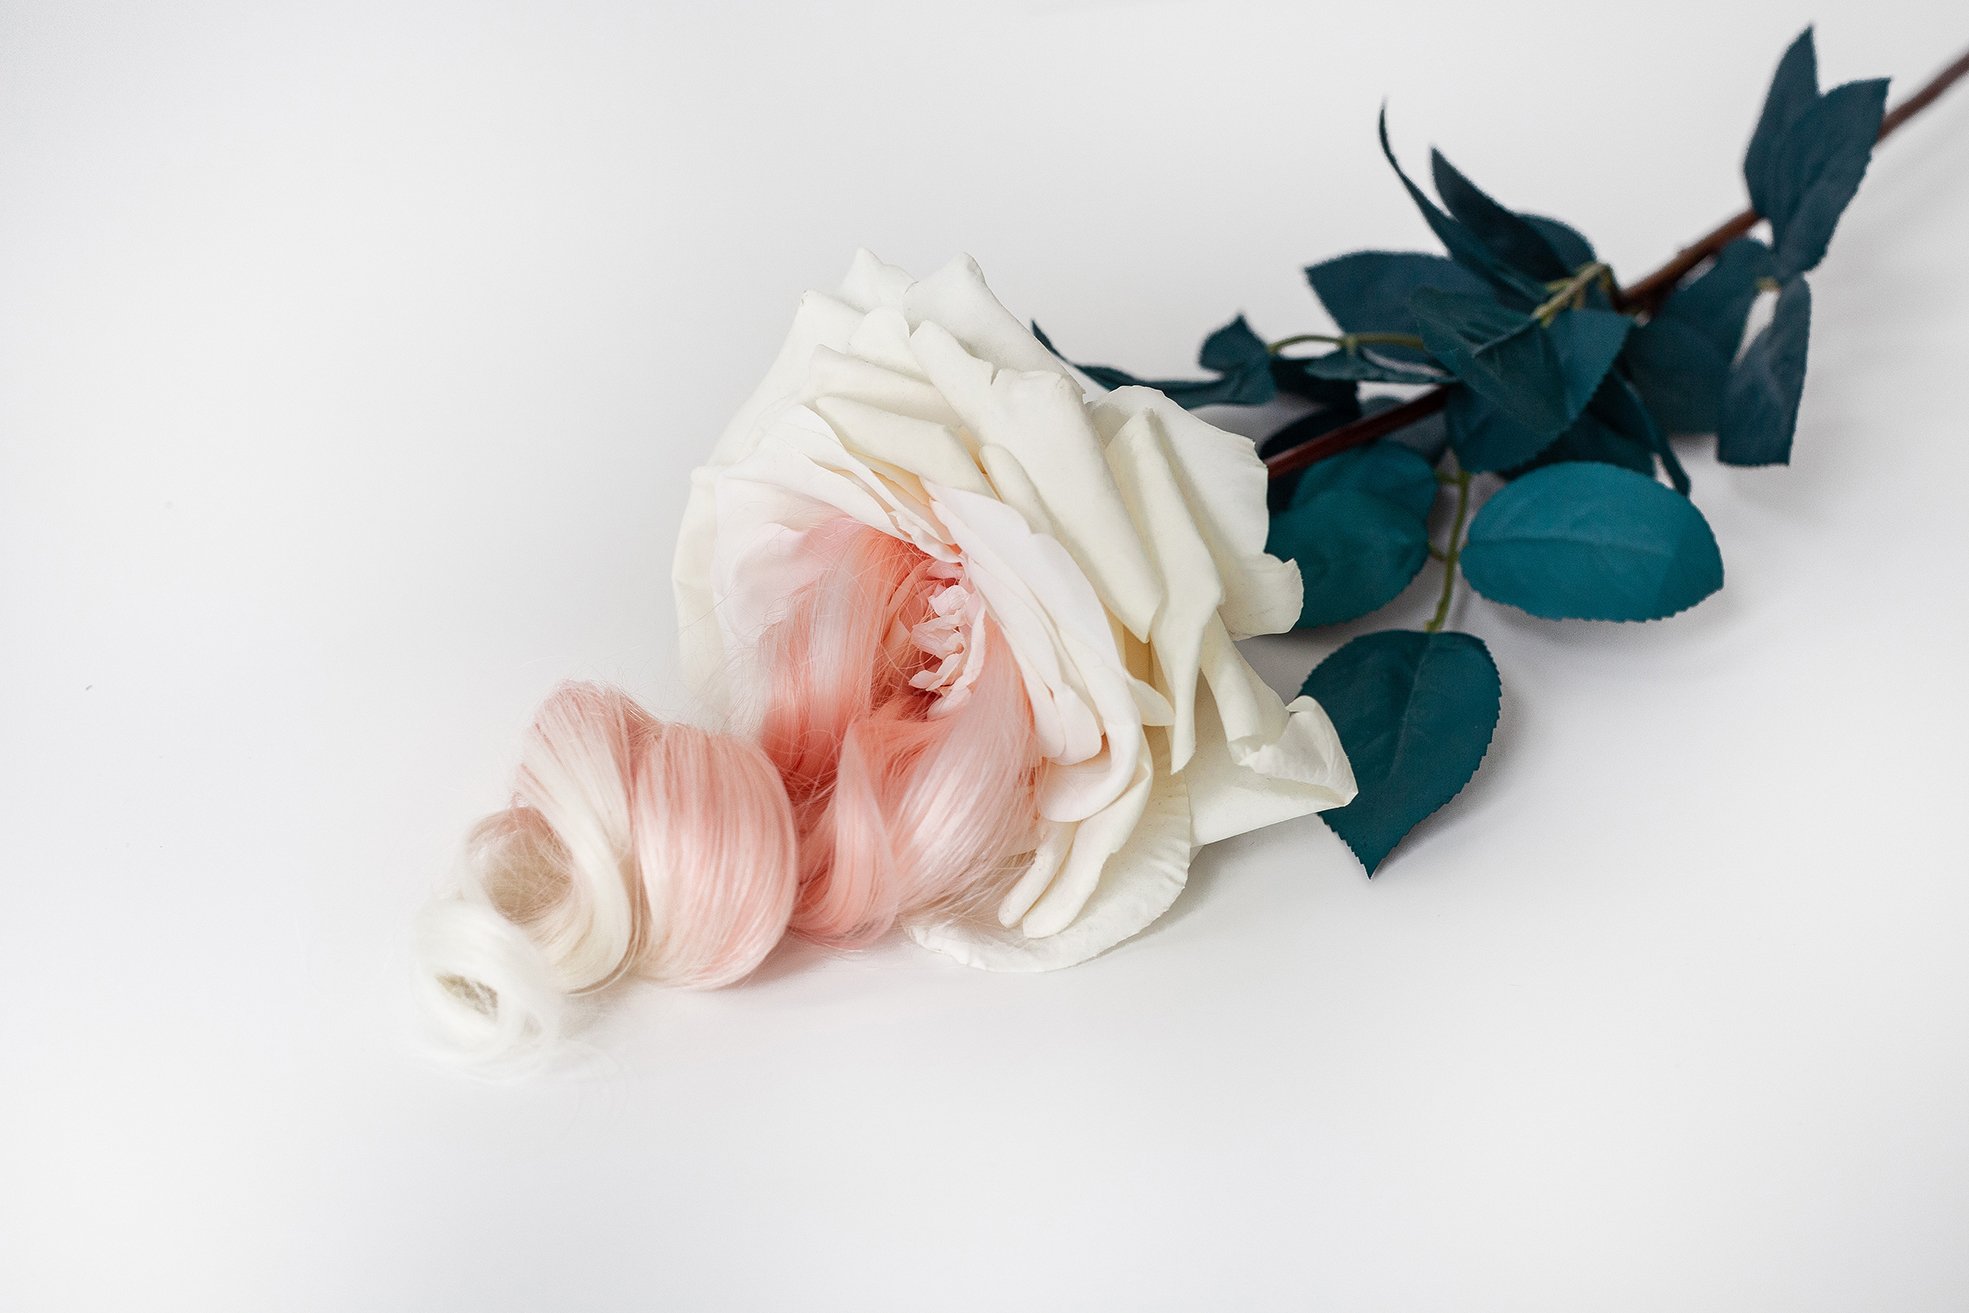 Sleeping beauty Rose-Aurore. From the Stranger Stories exhibition curated by Lizaveta Matveeva at MYTH Gallery. Saint Petersburg, 2019